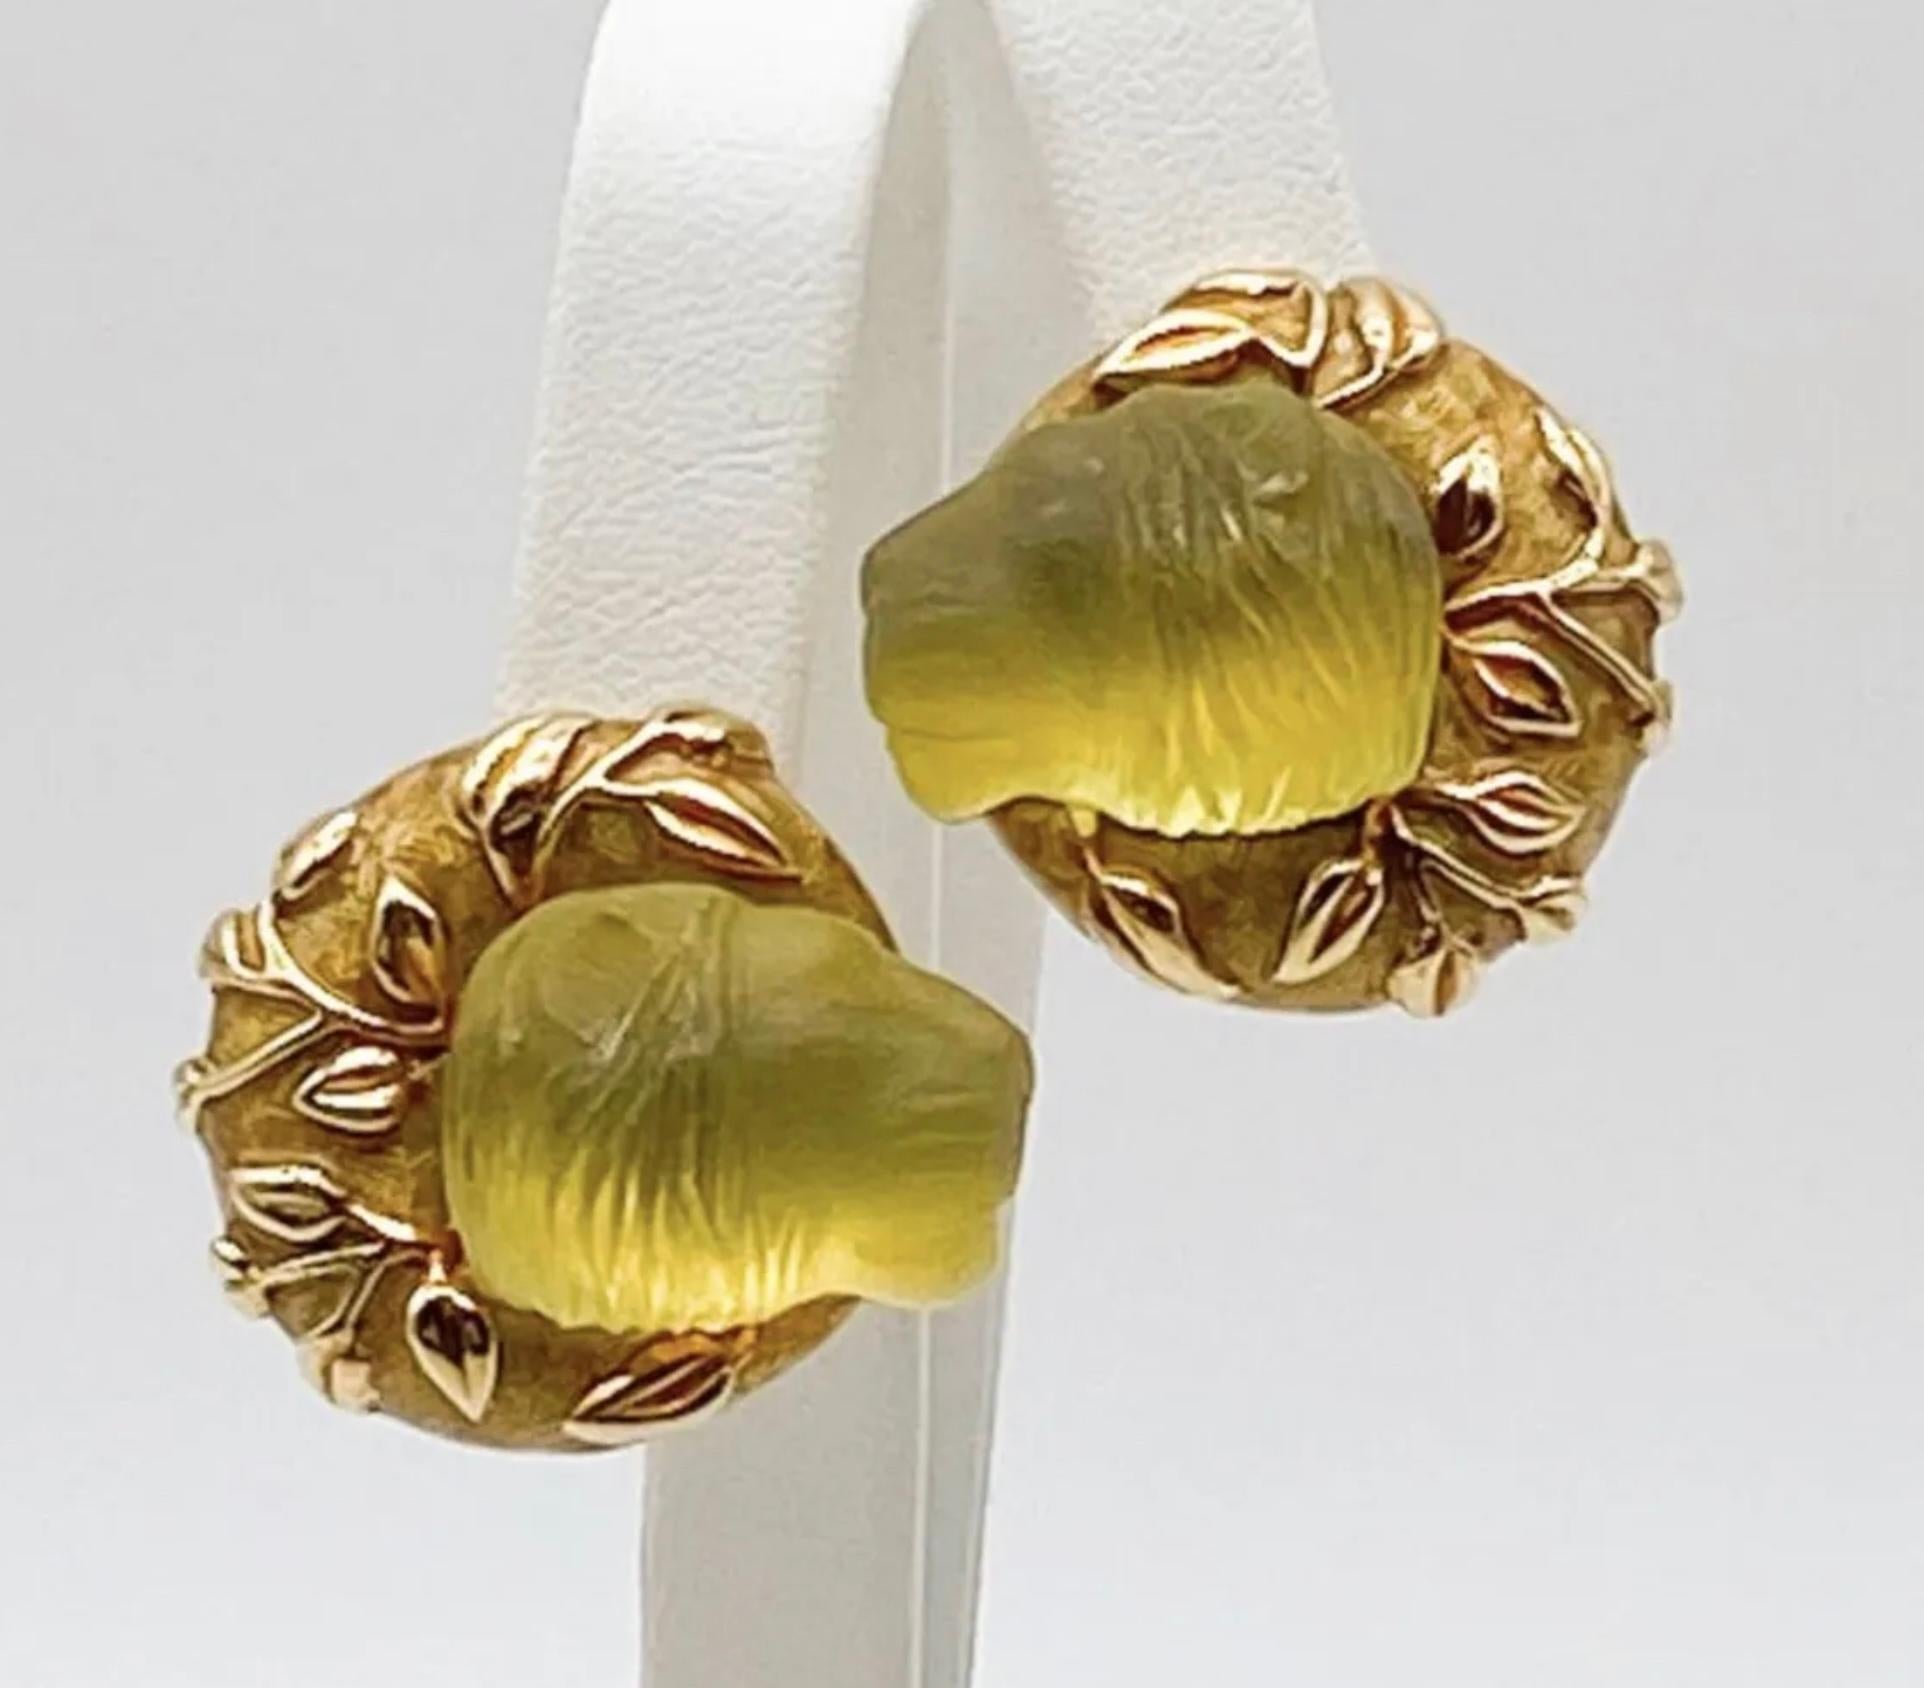 Authentic designer Elizabeth Gage Carved Beryl Lions Earrings  Mounted in 18k Gold with Original Box. 

Approx 1 5/8” x 1 5/8”. 46.5 Grams Total Weight. Clip On- Posts could be added by a jeweler.
